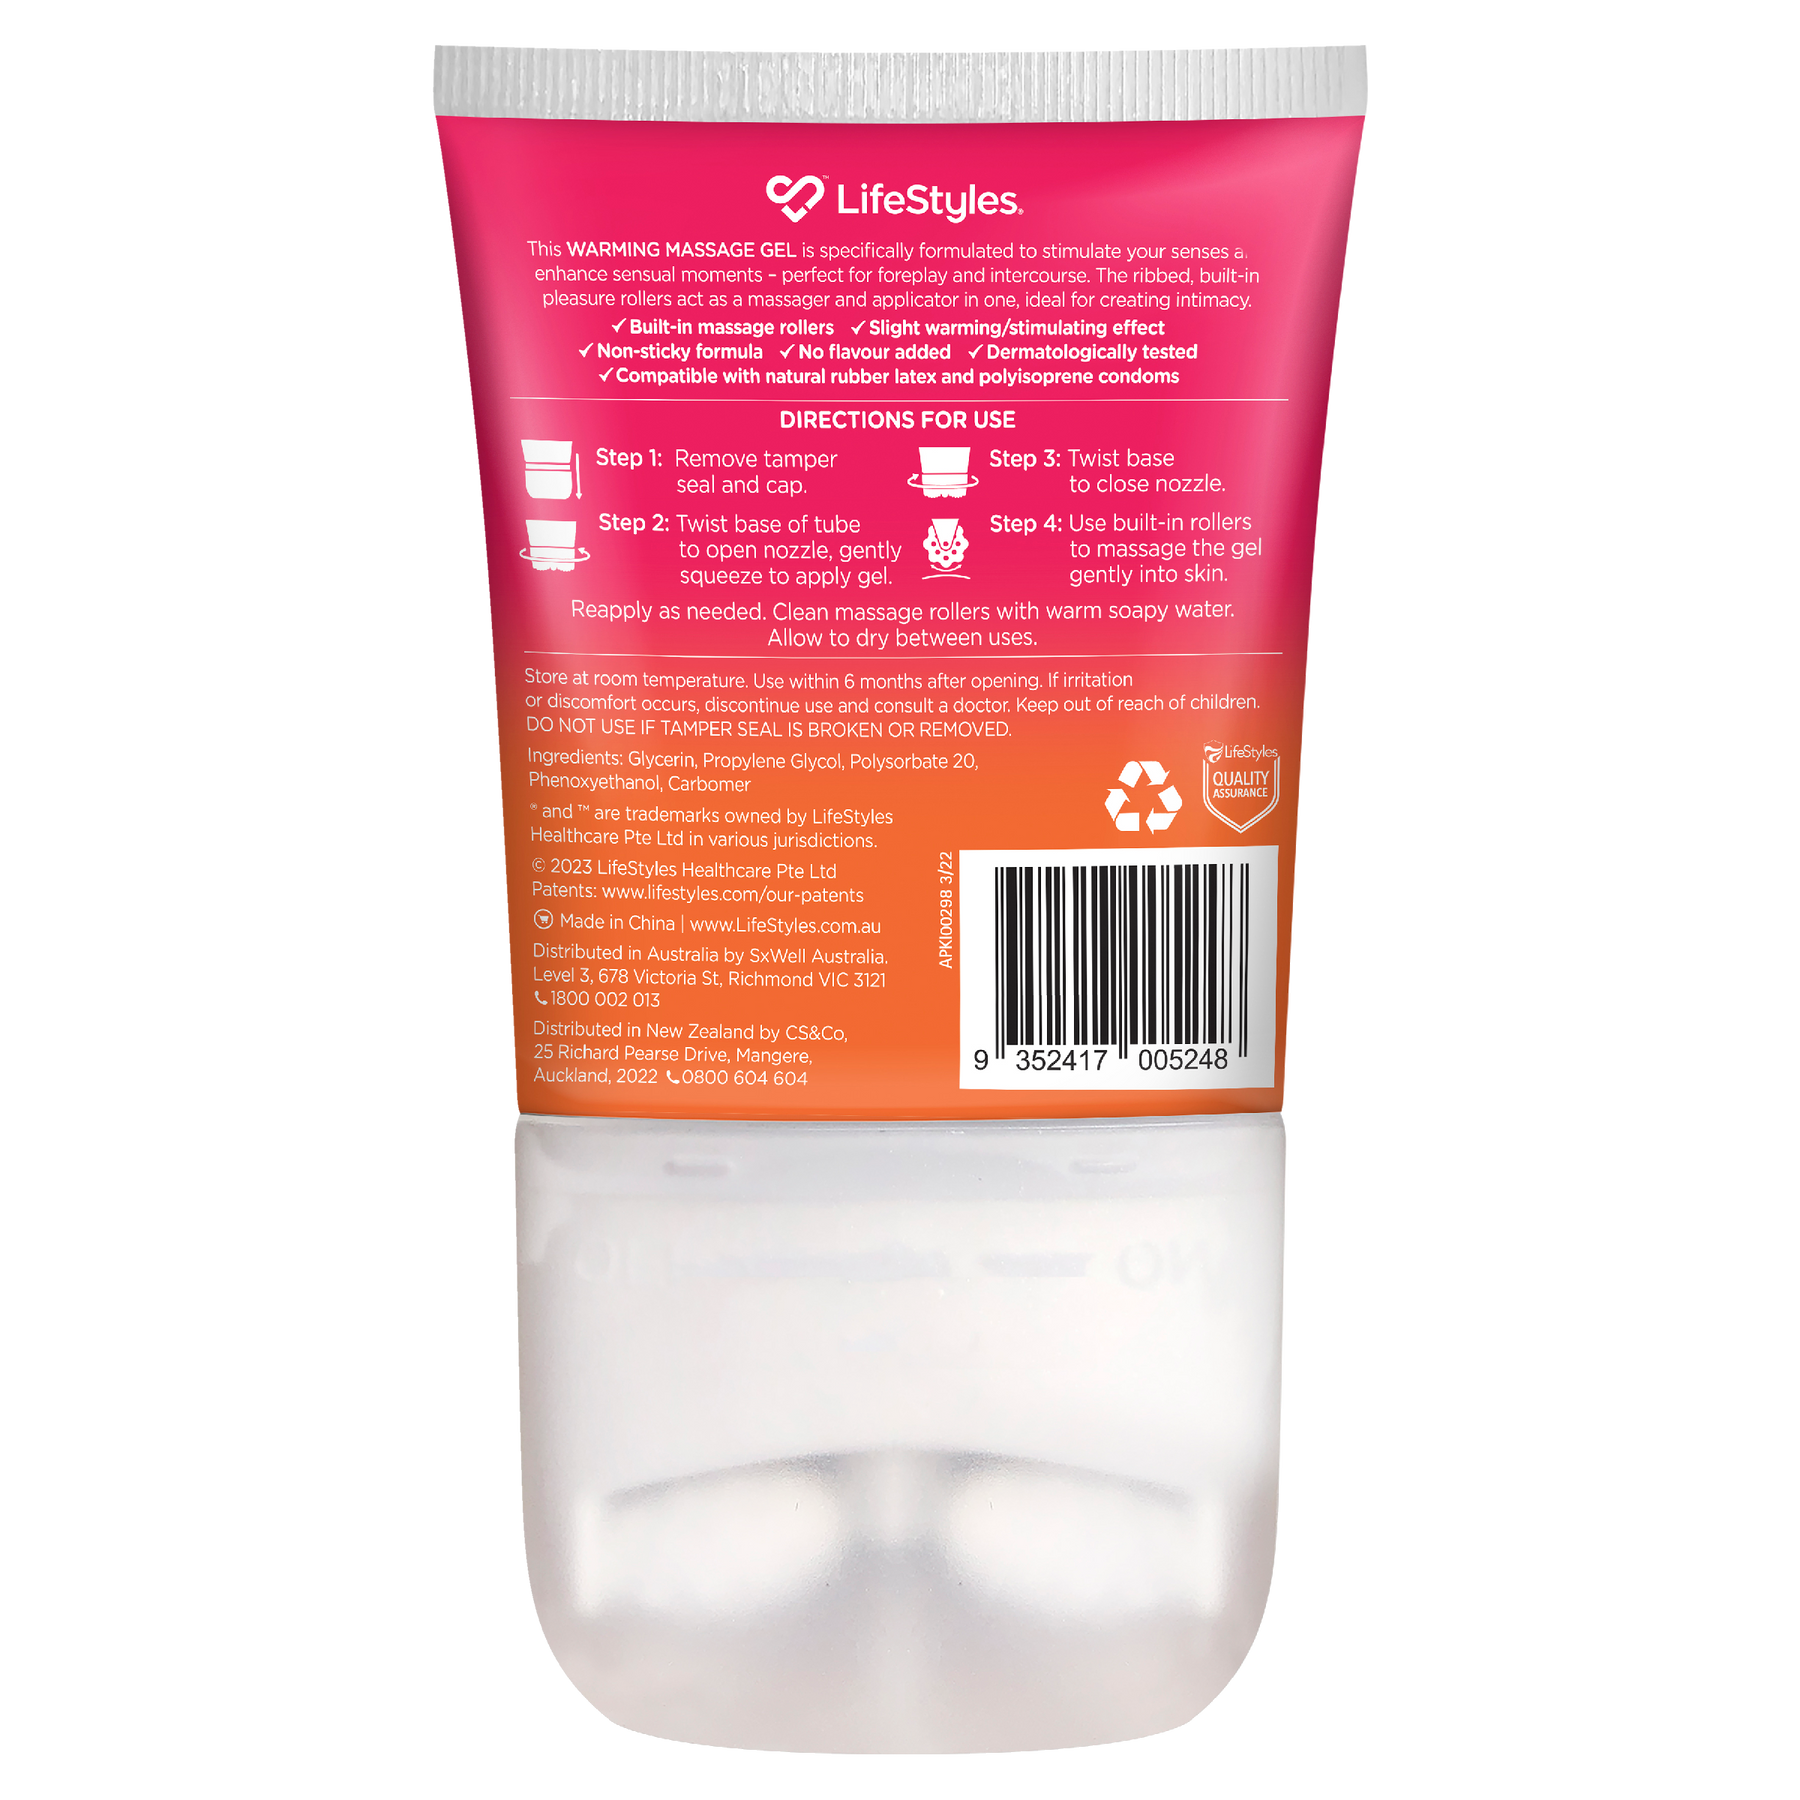 Lifestyles Lubricant Silky Smooth 100g - National Pharmacies